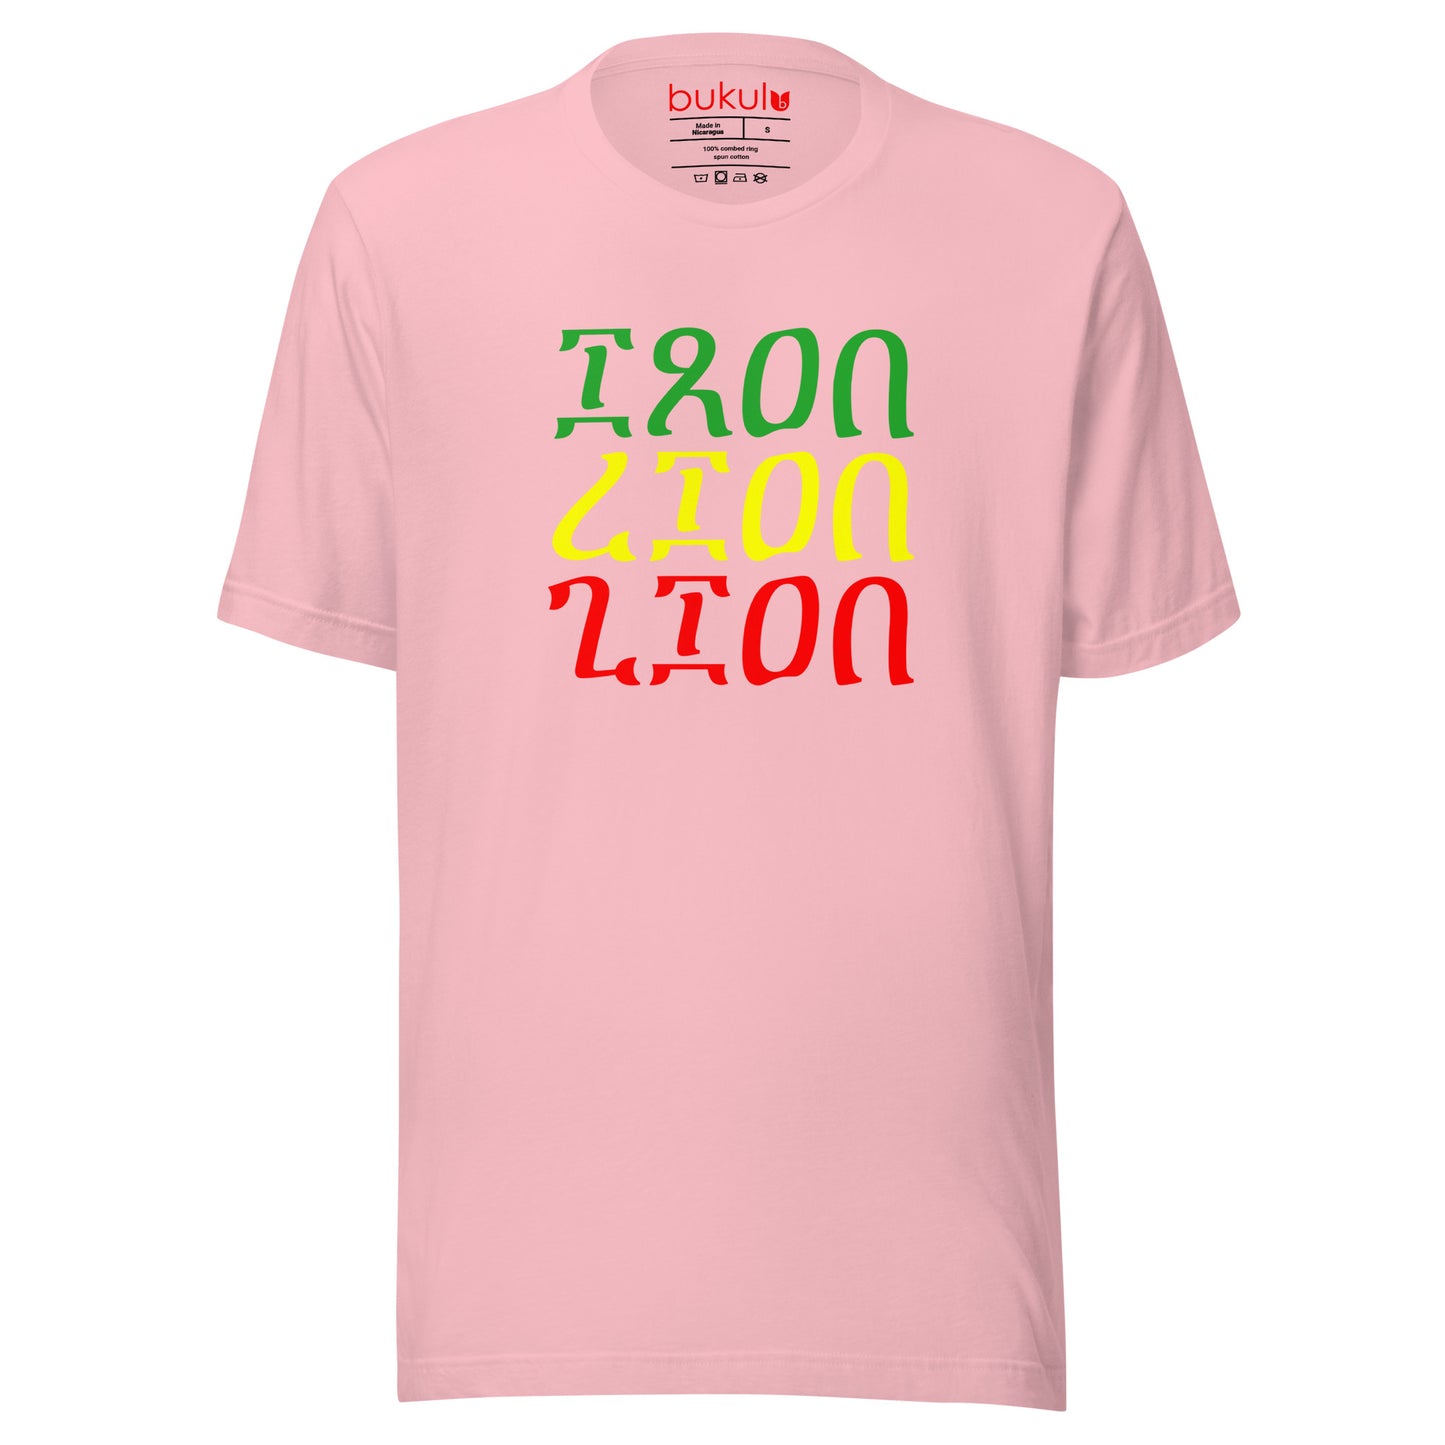 Iron Lion Zion Tee Bob Marley's song in Ethiopian Script T Shirt for Reggae Music Lovers | Unisex